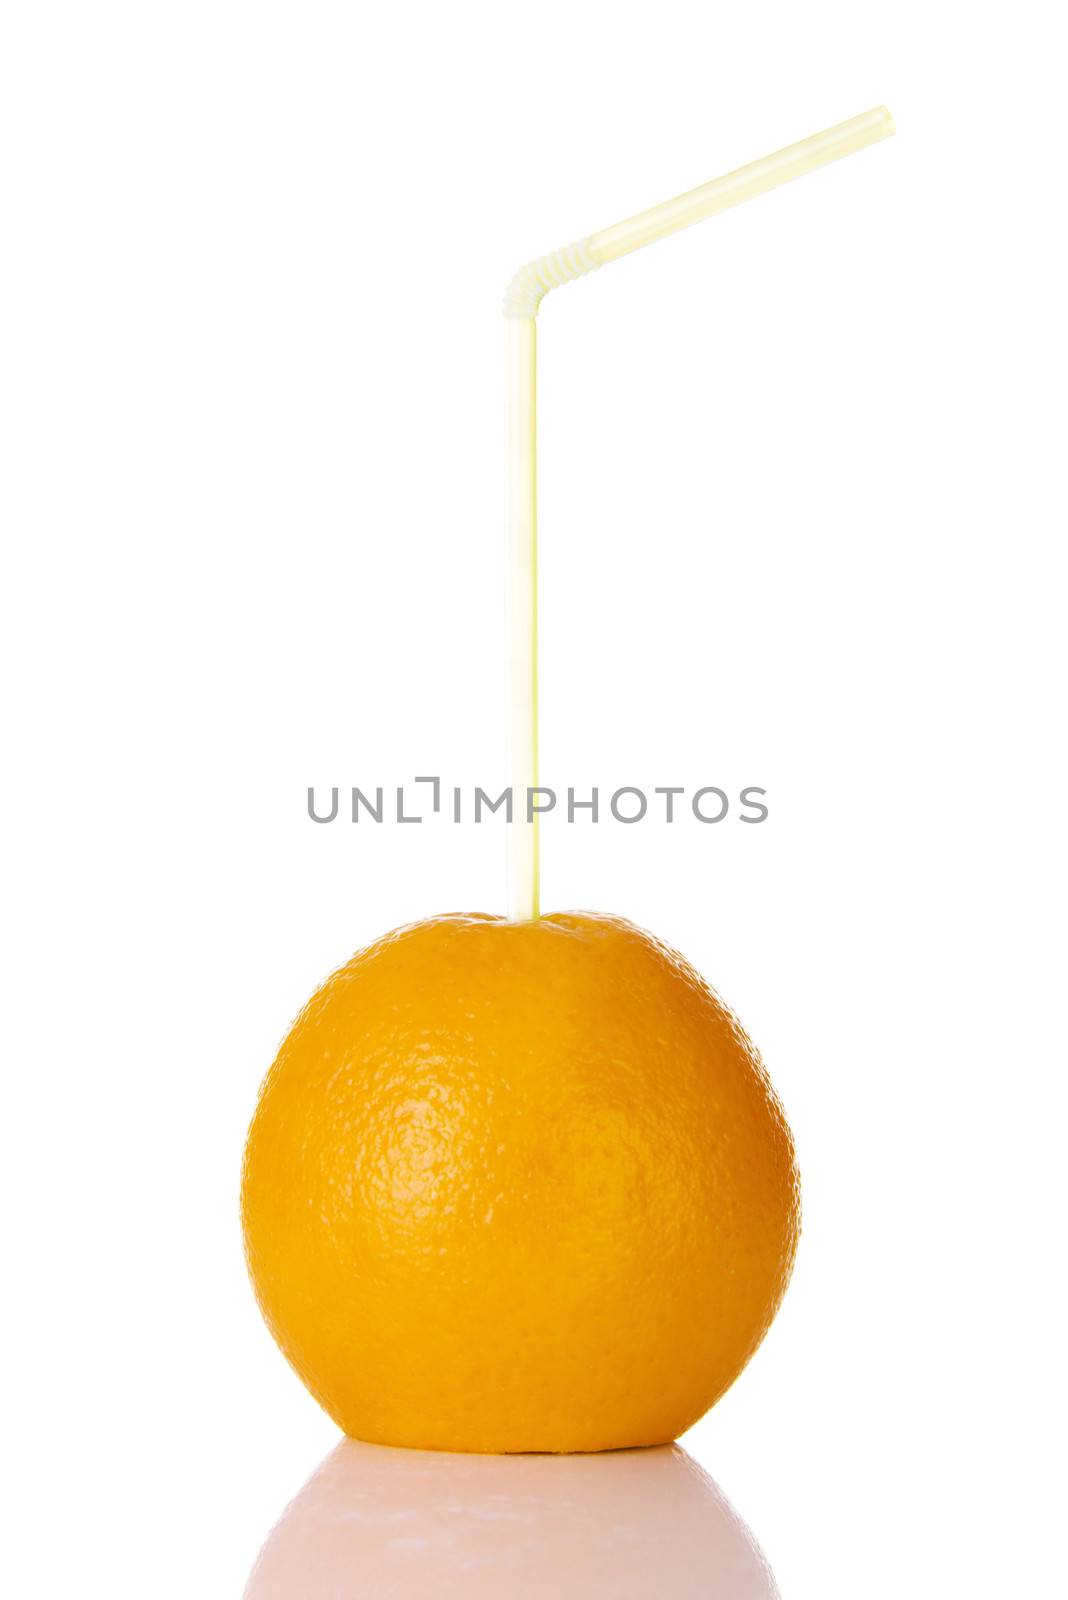 Orange fruit with straw put in it. Isolated on white.